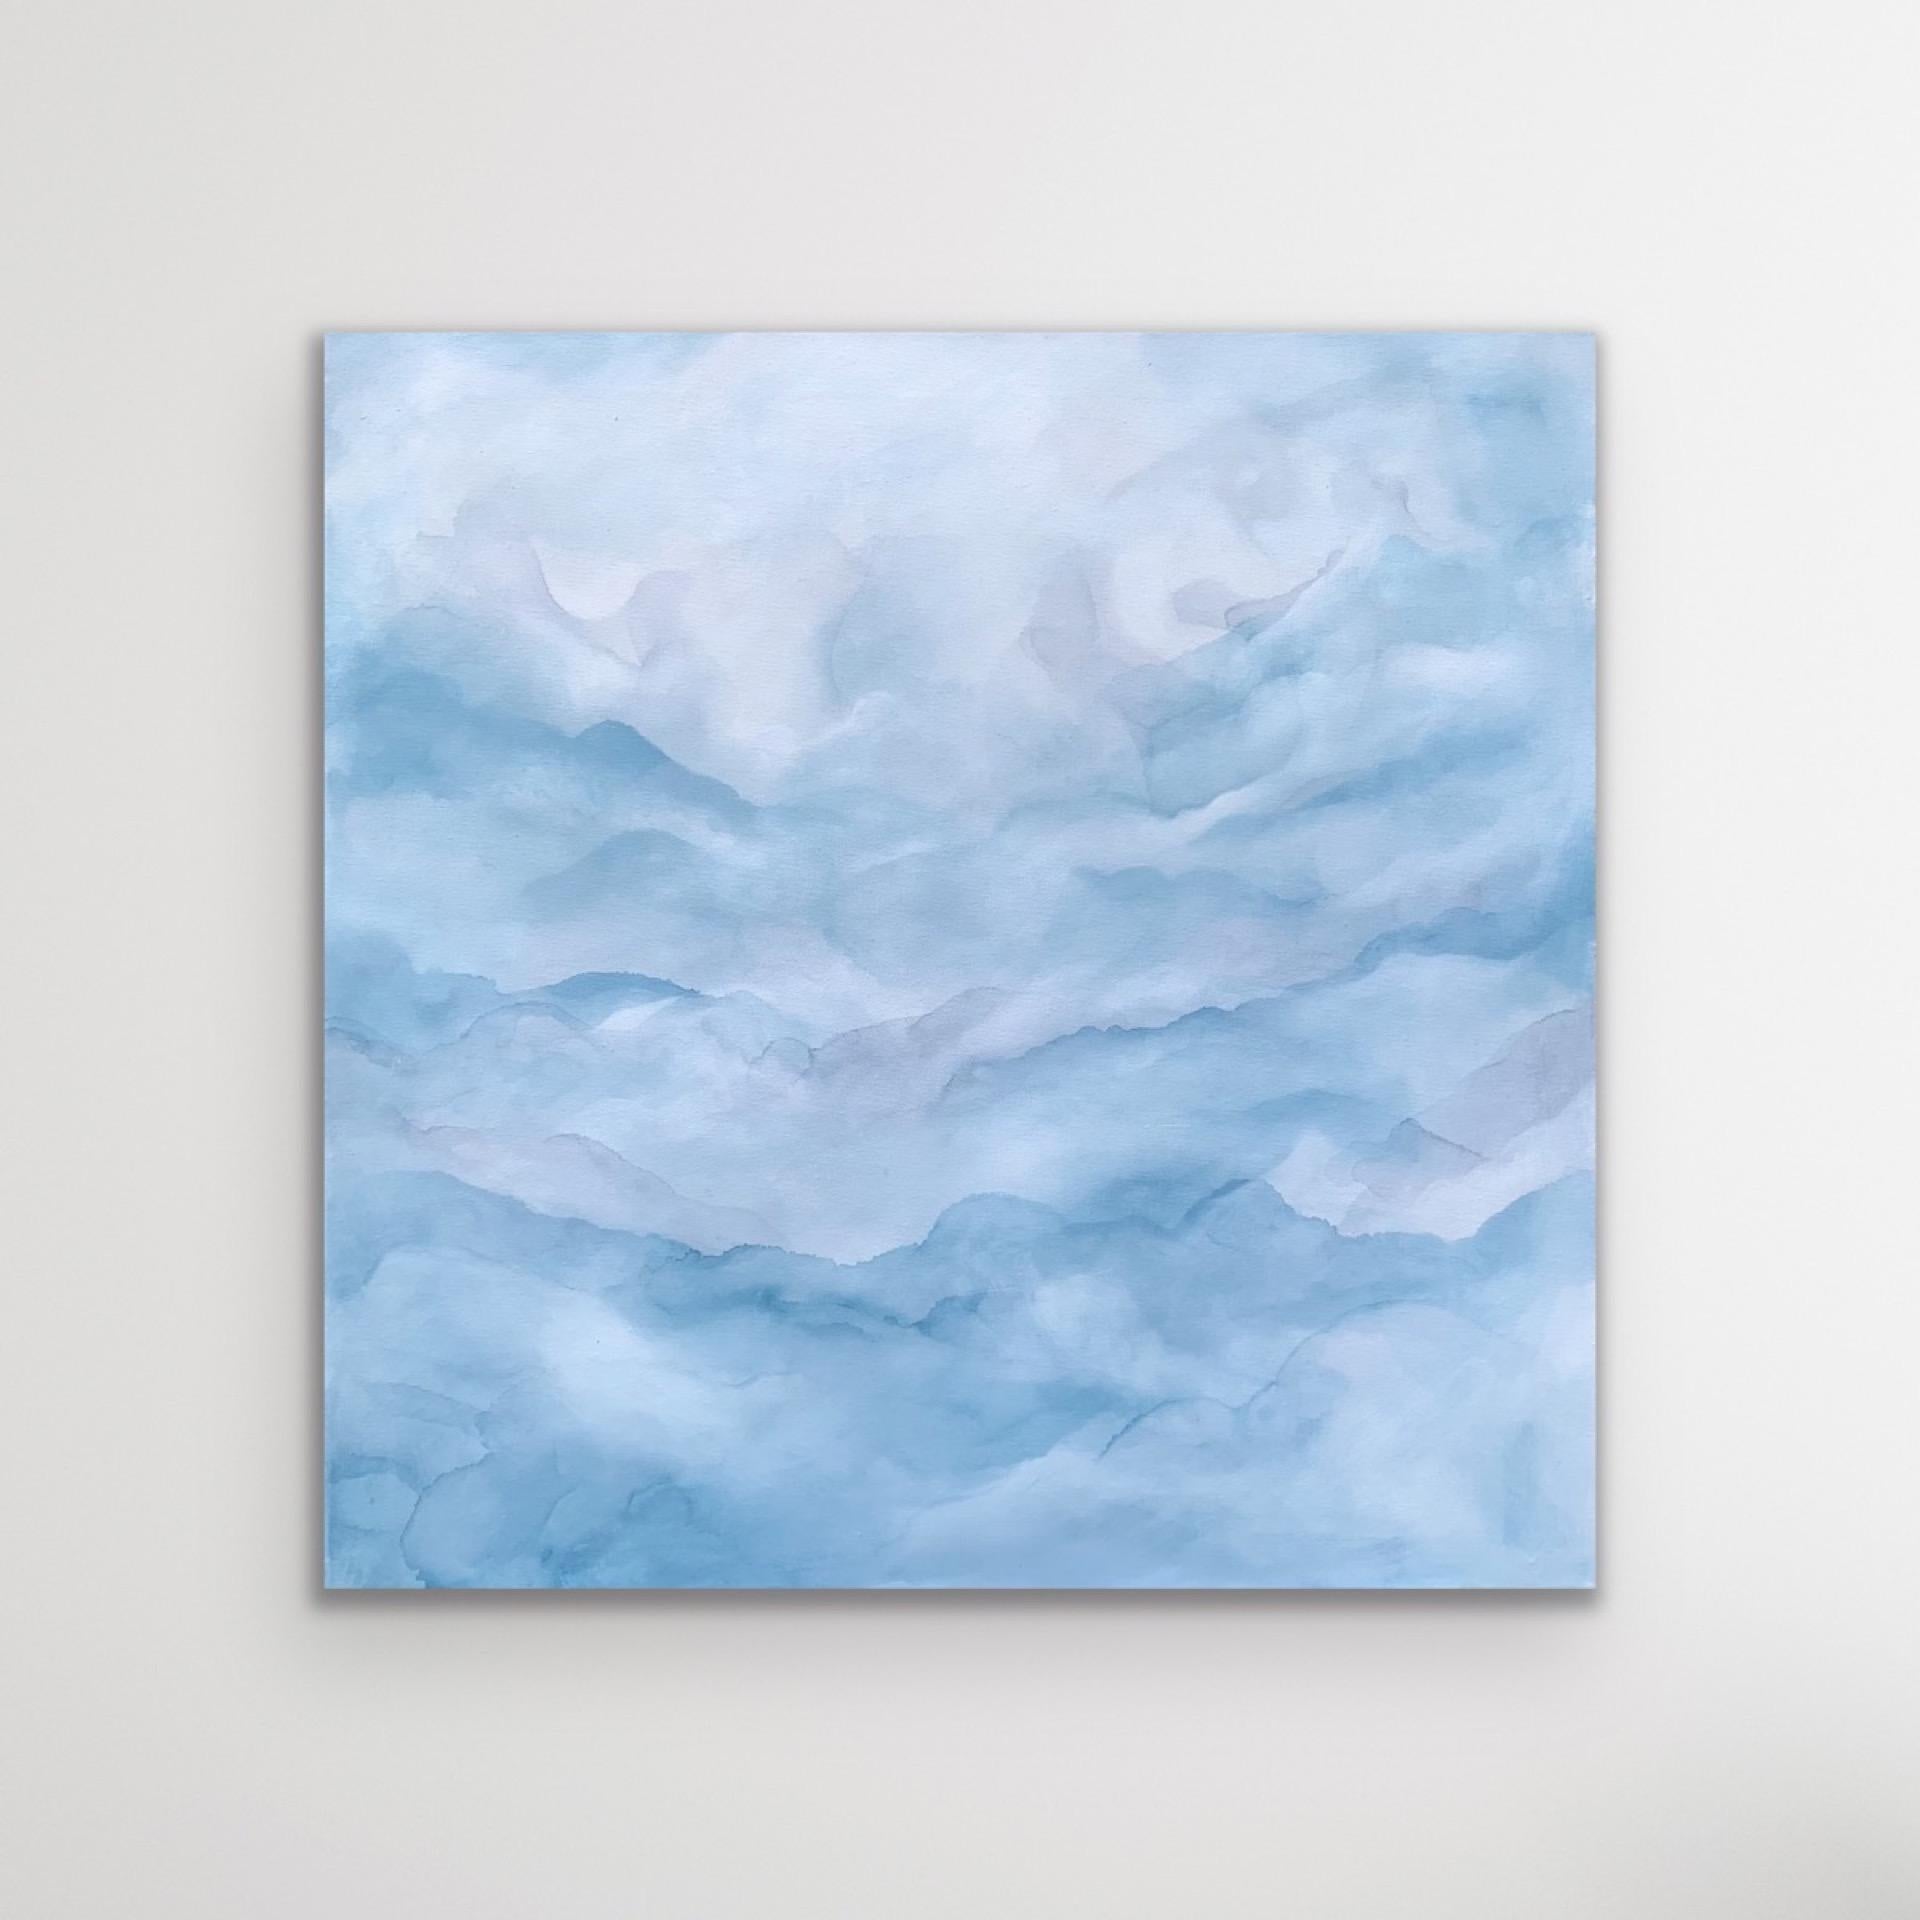 This original abstract painting on canvas is called Silence. Calming layers of inks overlap and are punctuated with white and grey billowing lines. This abstract painting, is calming, allowing you a moment of silence and tranquility. The physical